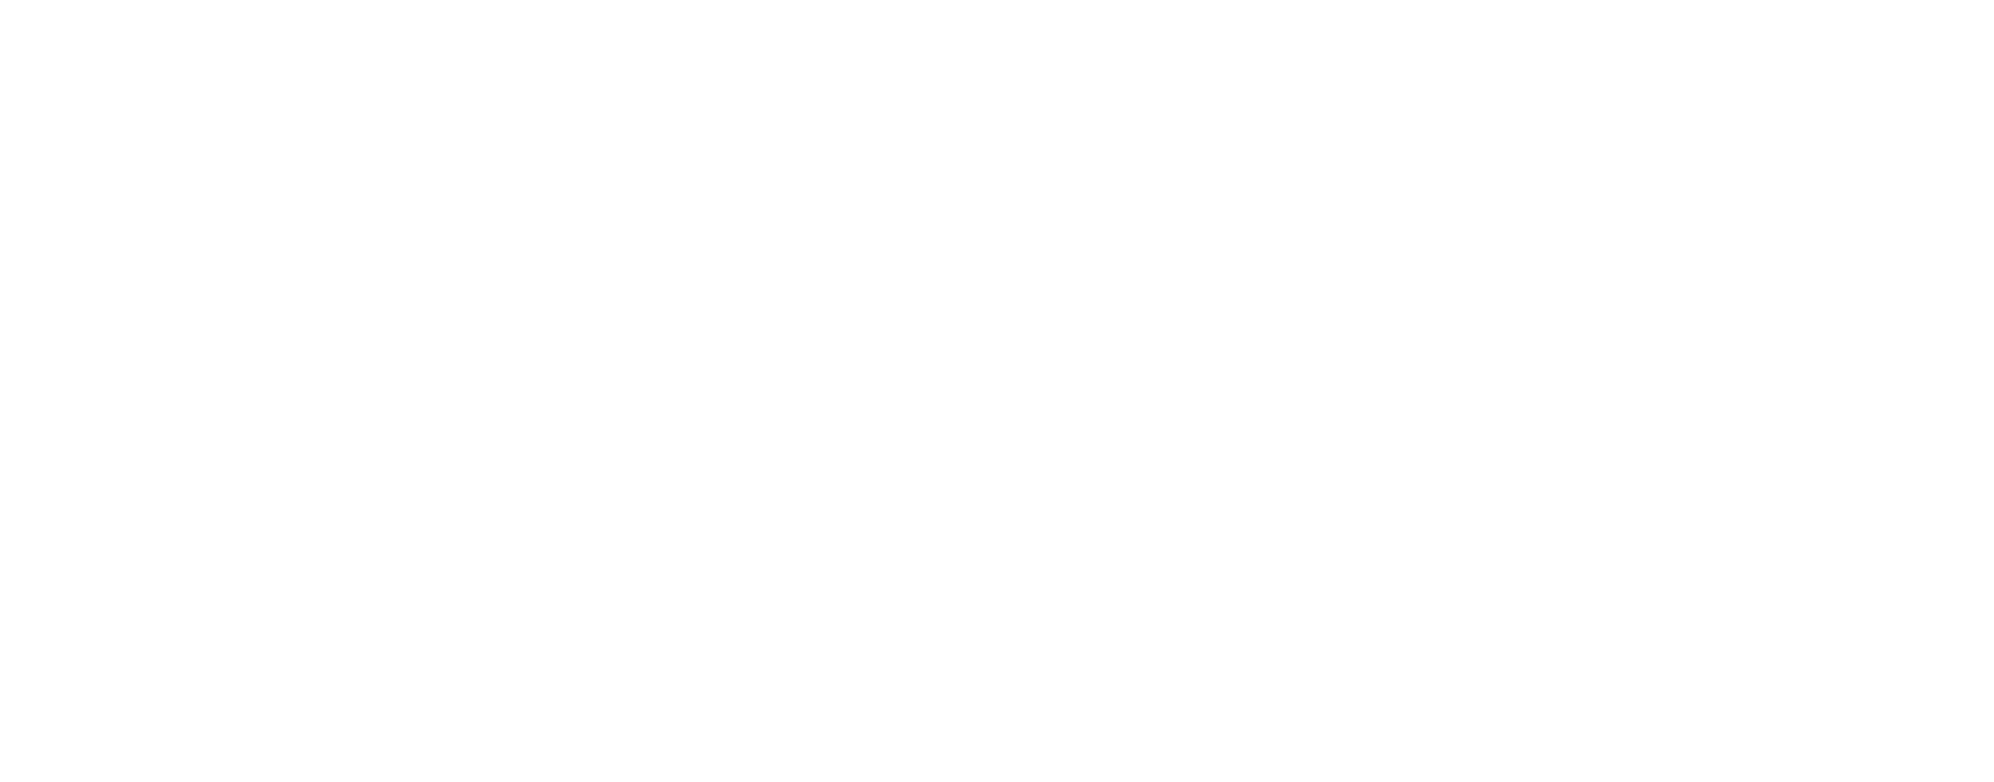 OpenFF Toolkit 0.10.3+0.g757813d1.dirty documentation logo